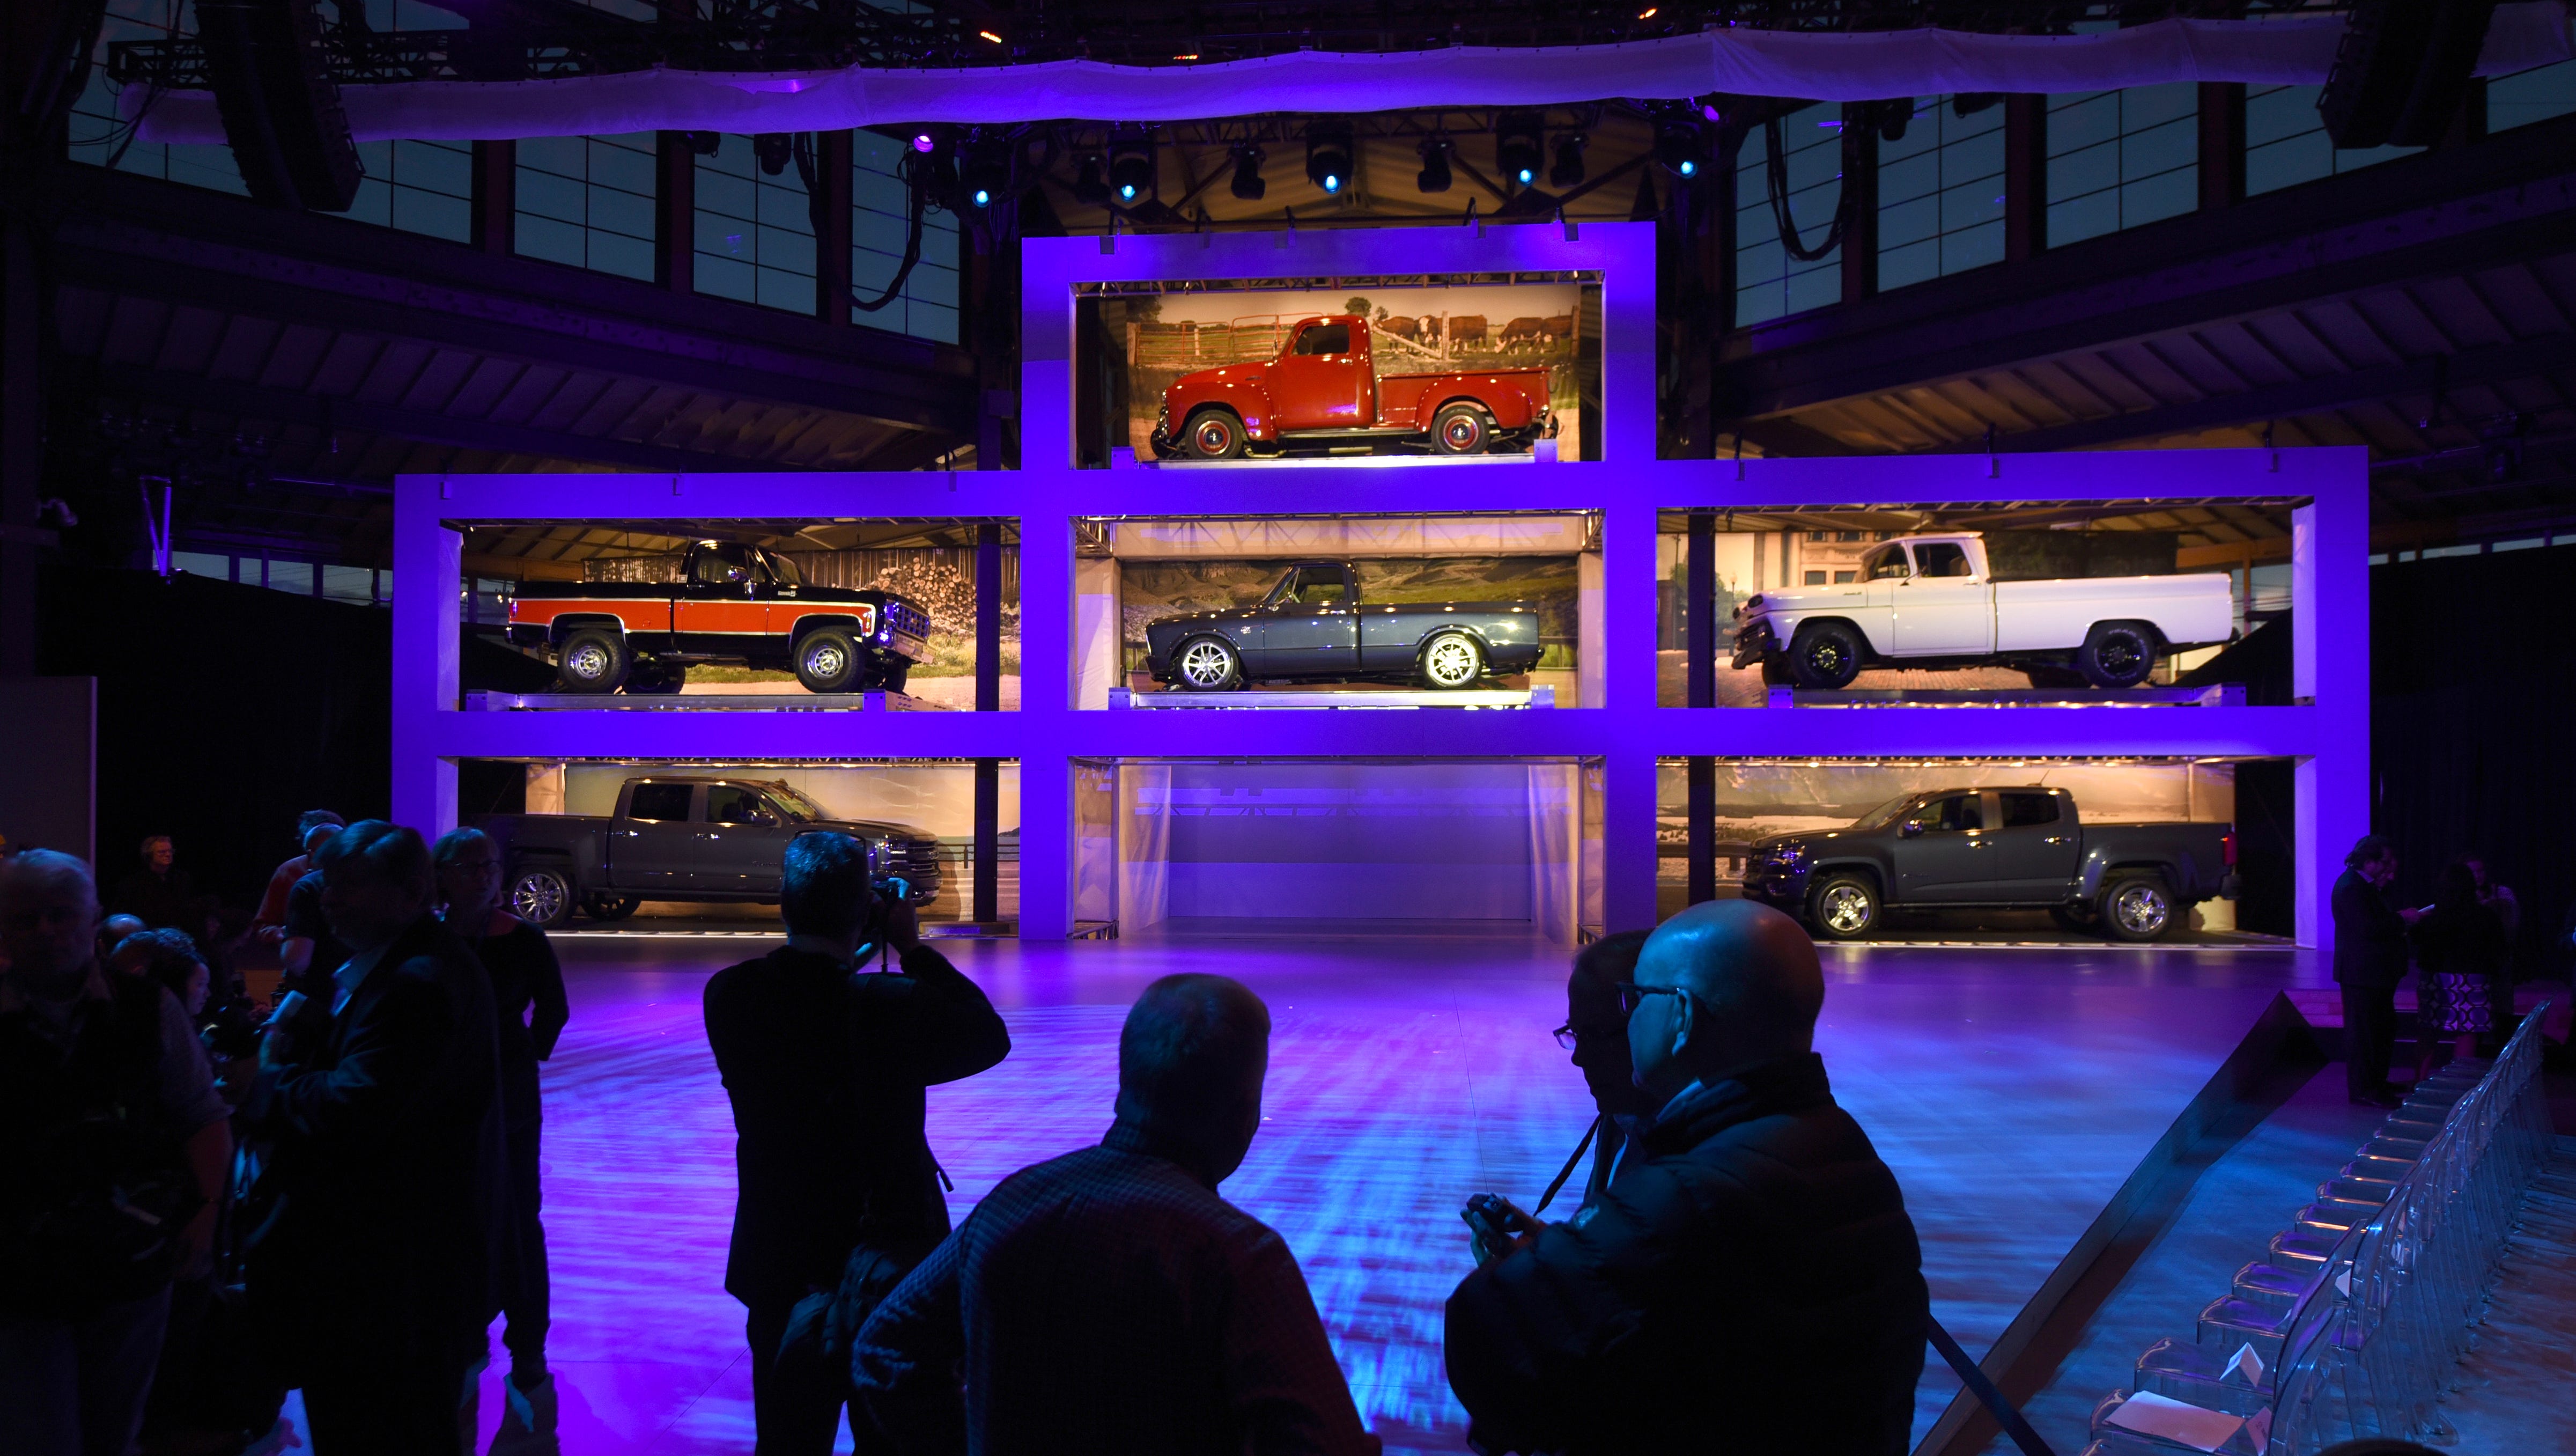 General Motors stages an era of trucks on stage before they unveil the 2019 Chevy Silverado truck editions at Eastern Market's Shed 3.